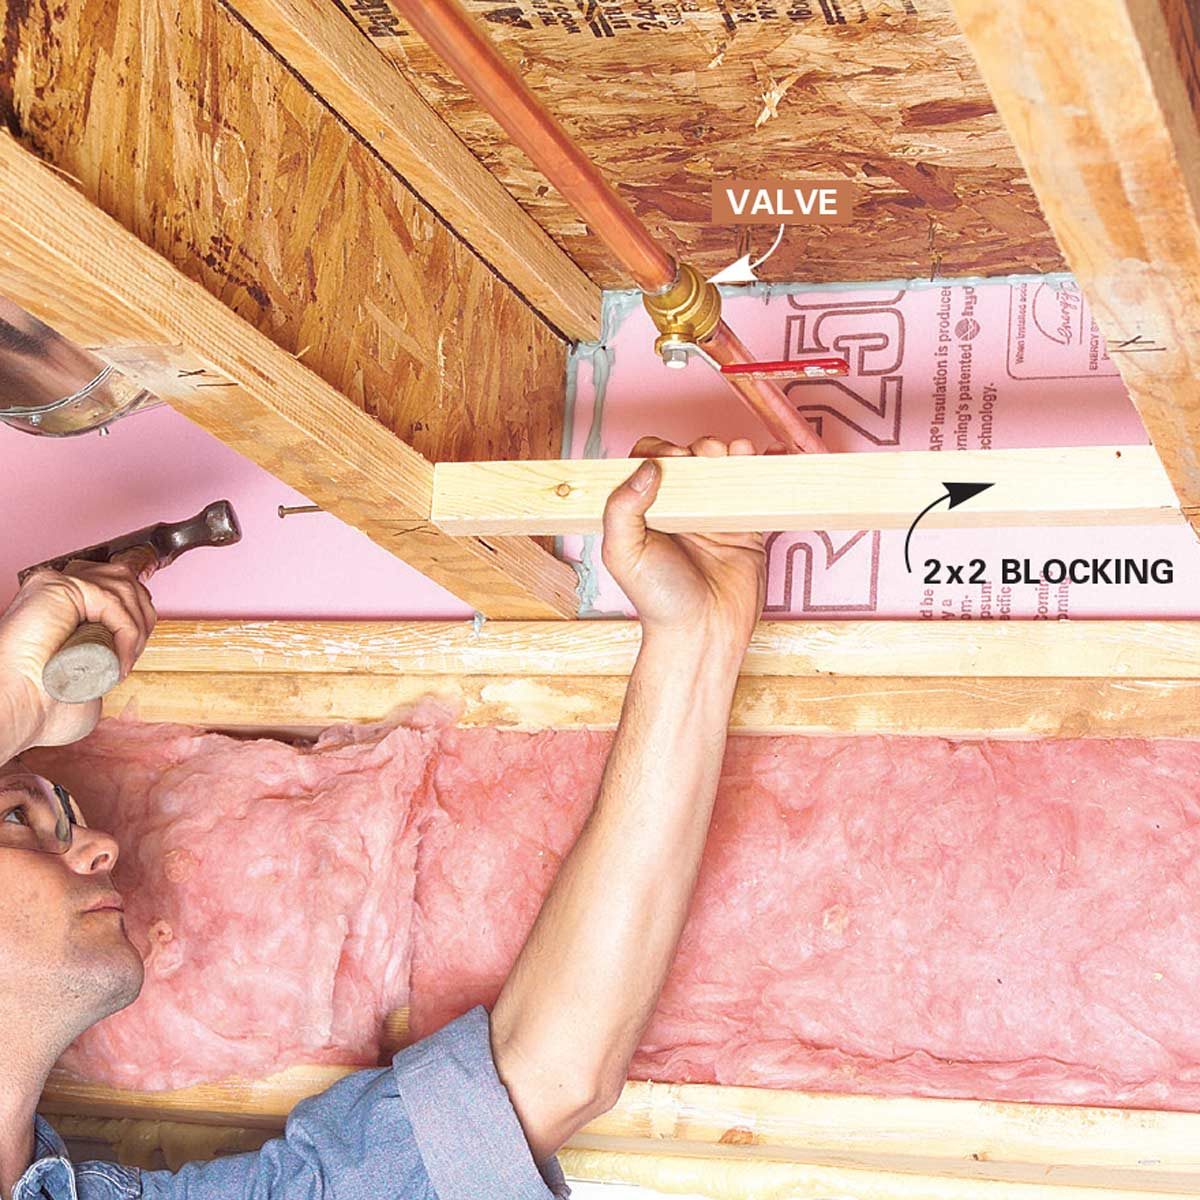 How To Finish A Basement Framing And Insulating The